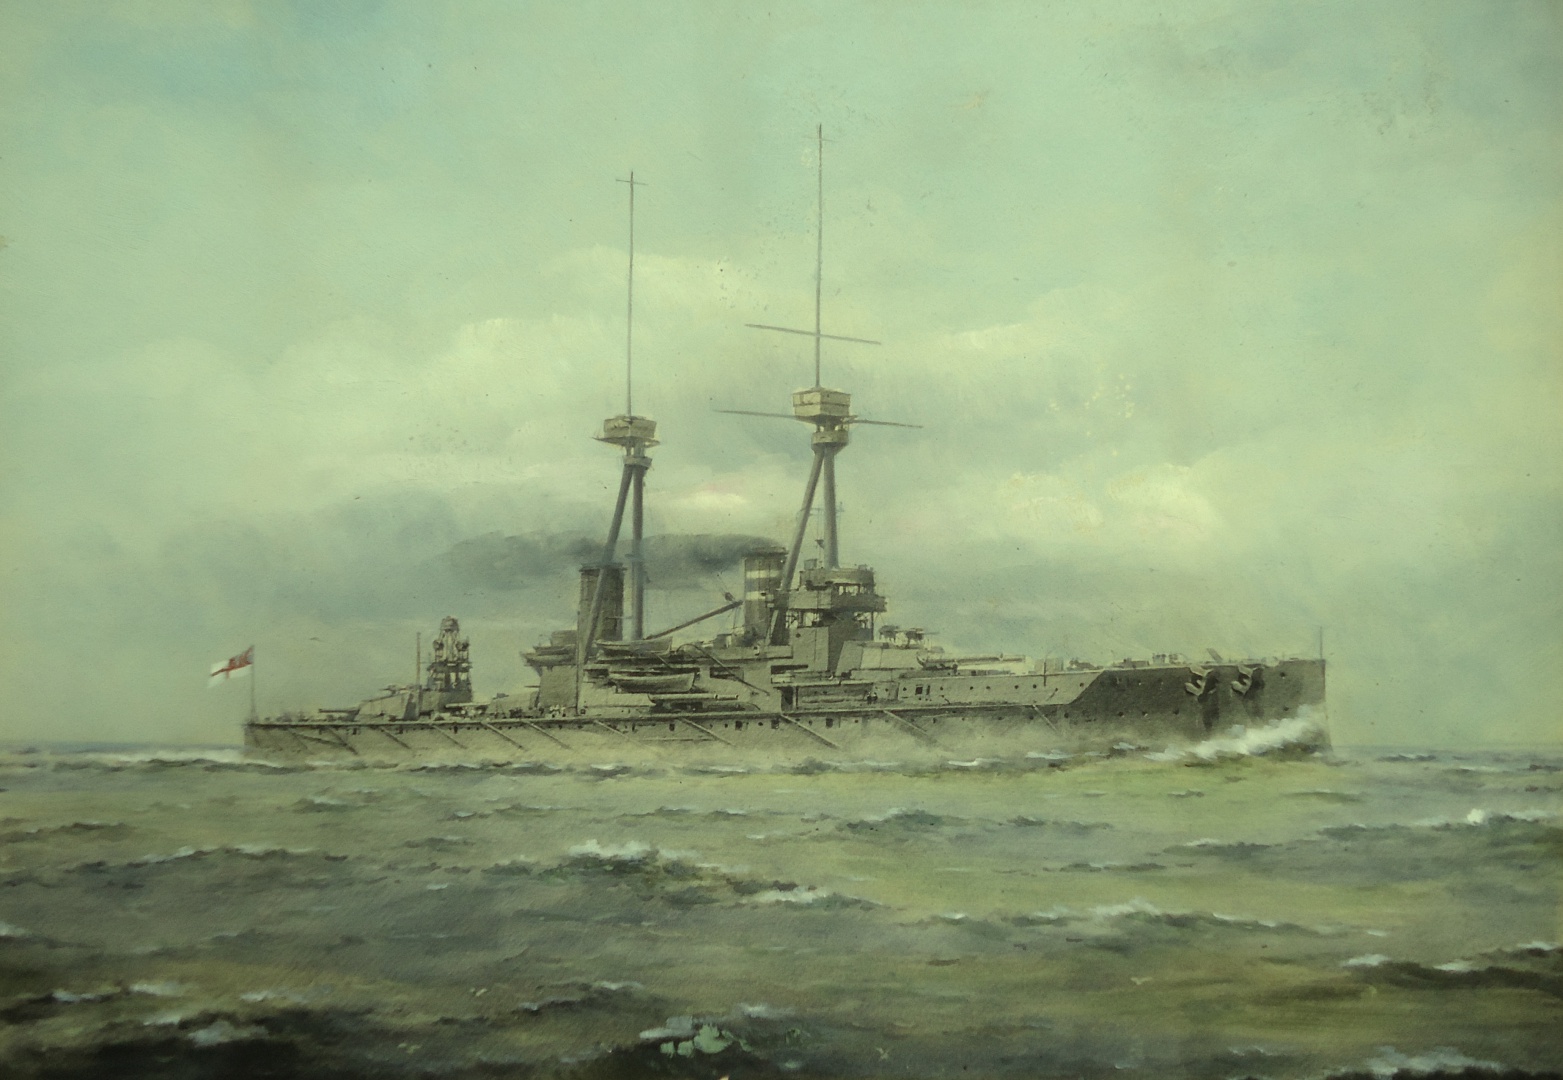 HMS SUPERB pre 1912/13 in the style of Frank Watson Wood